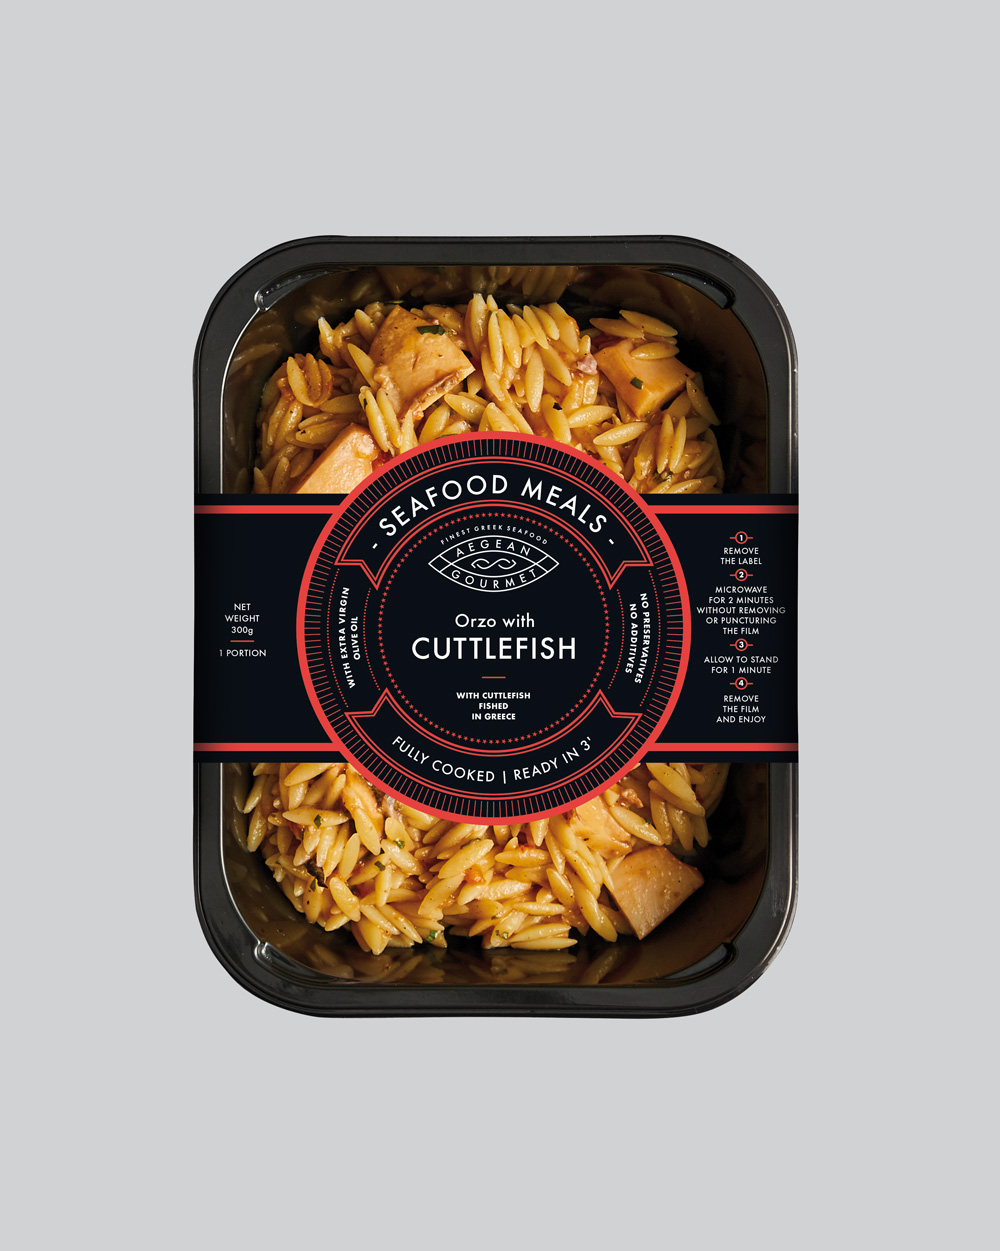 Seafood Meal product into packaging, Orzo with cuttlefish